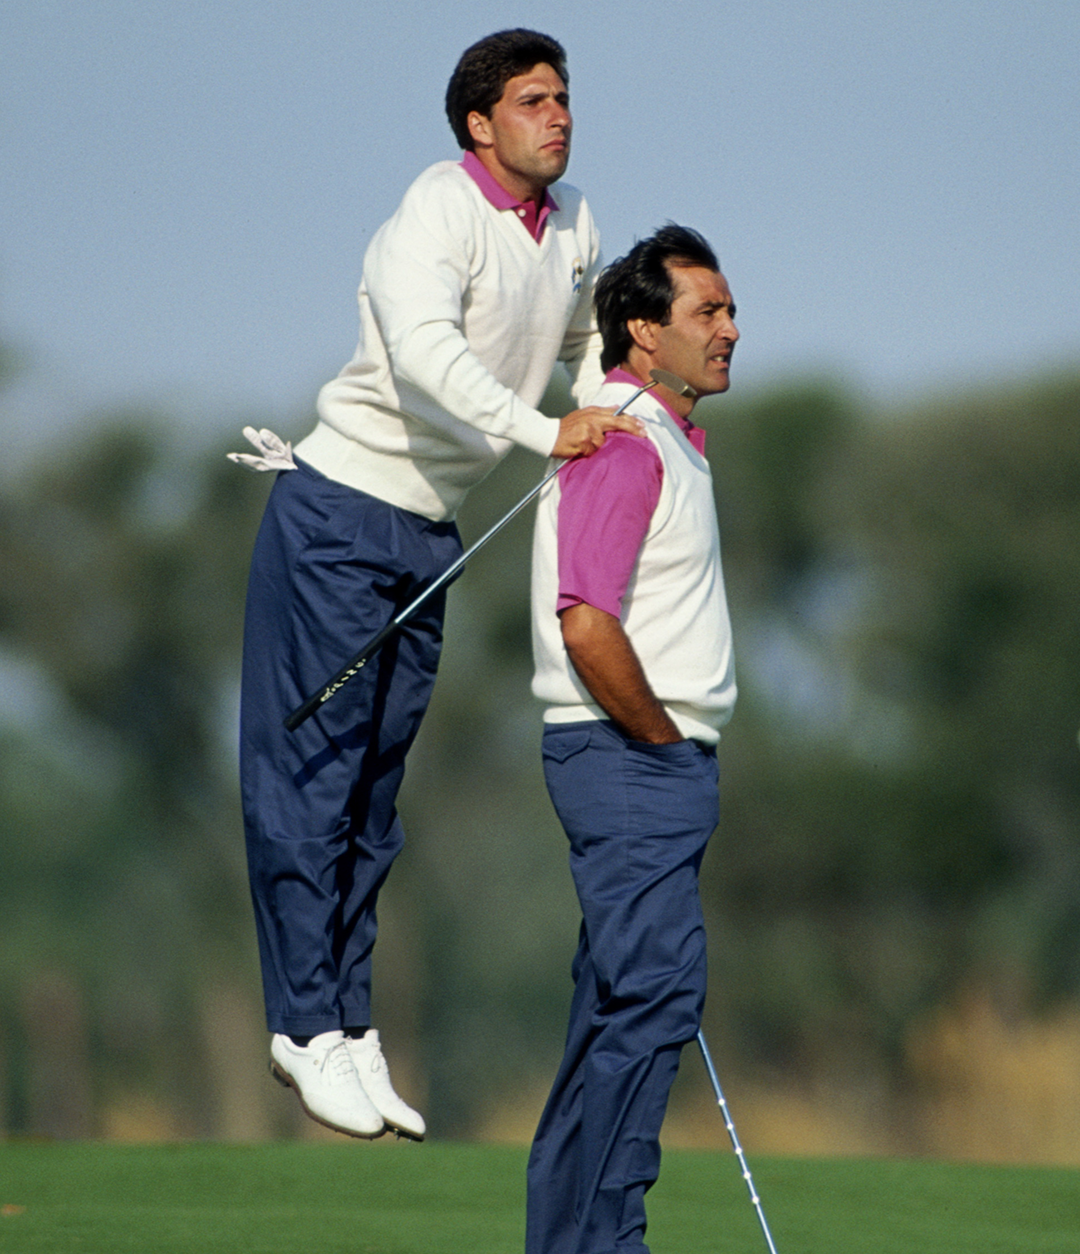 José María Olazábal and Seve Ballesteros at the 1991 Ryder Cup. Courtesy of David Cannon/Getty Images